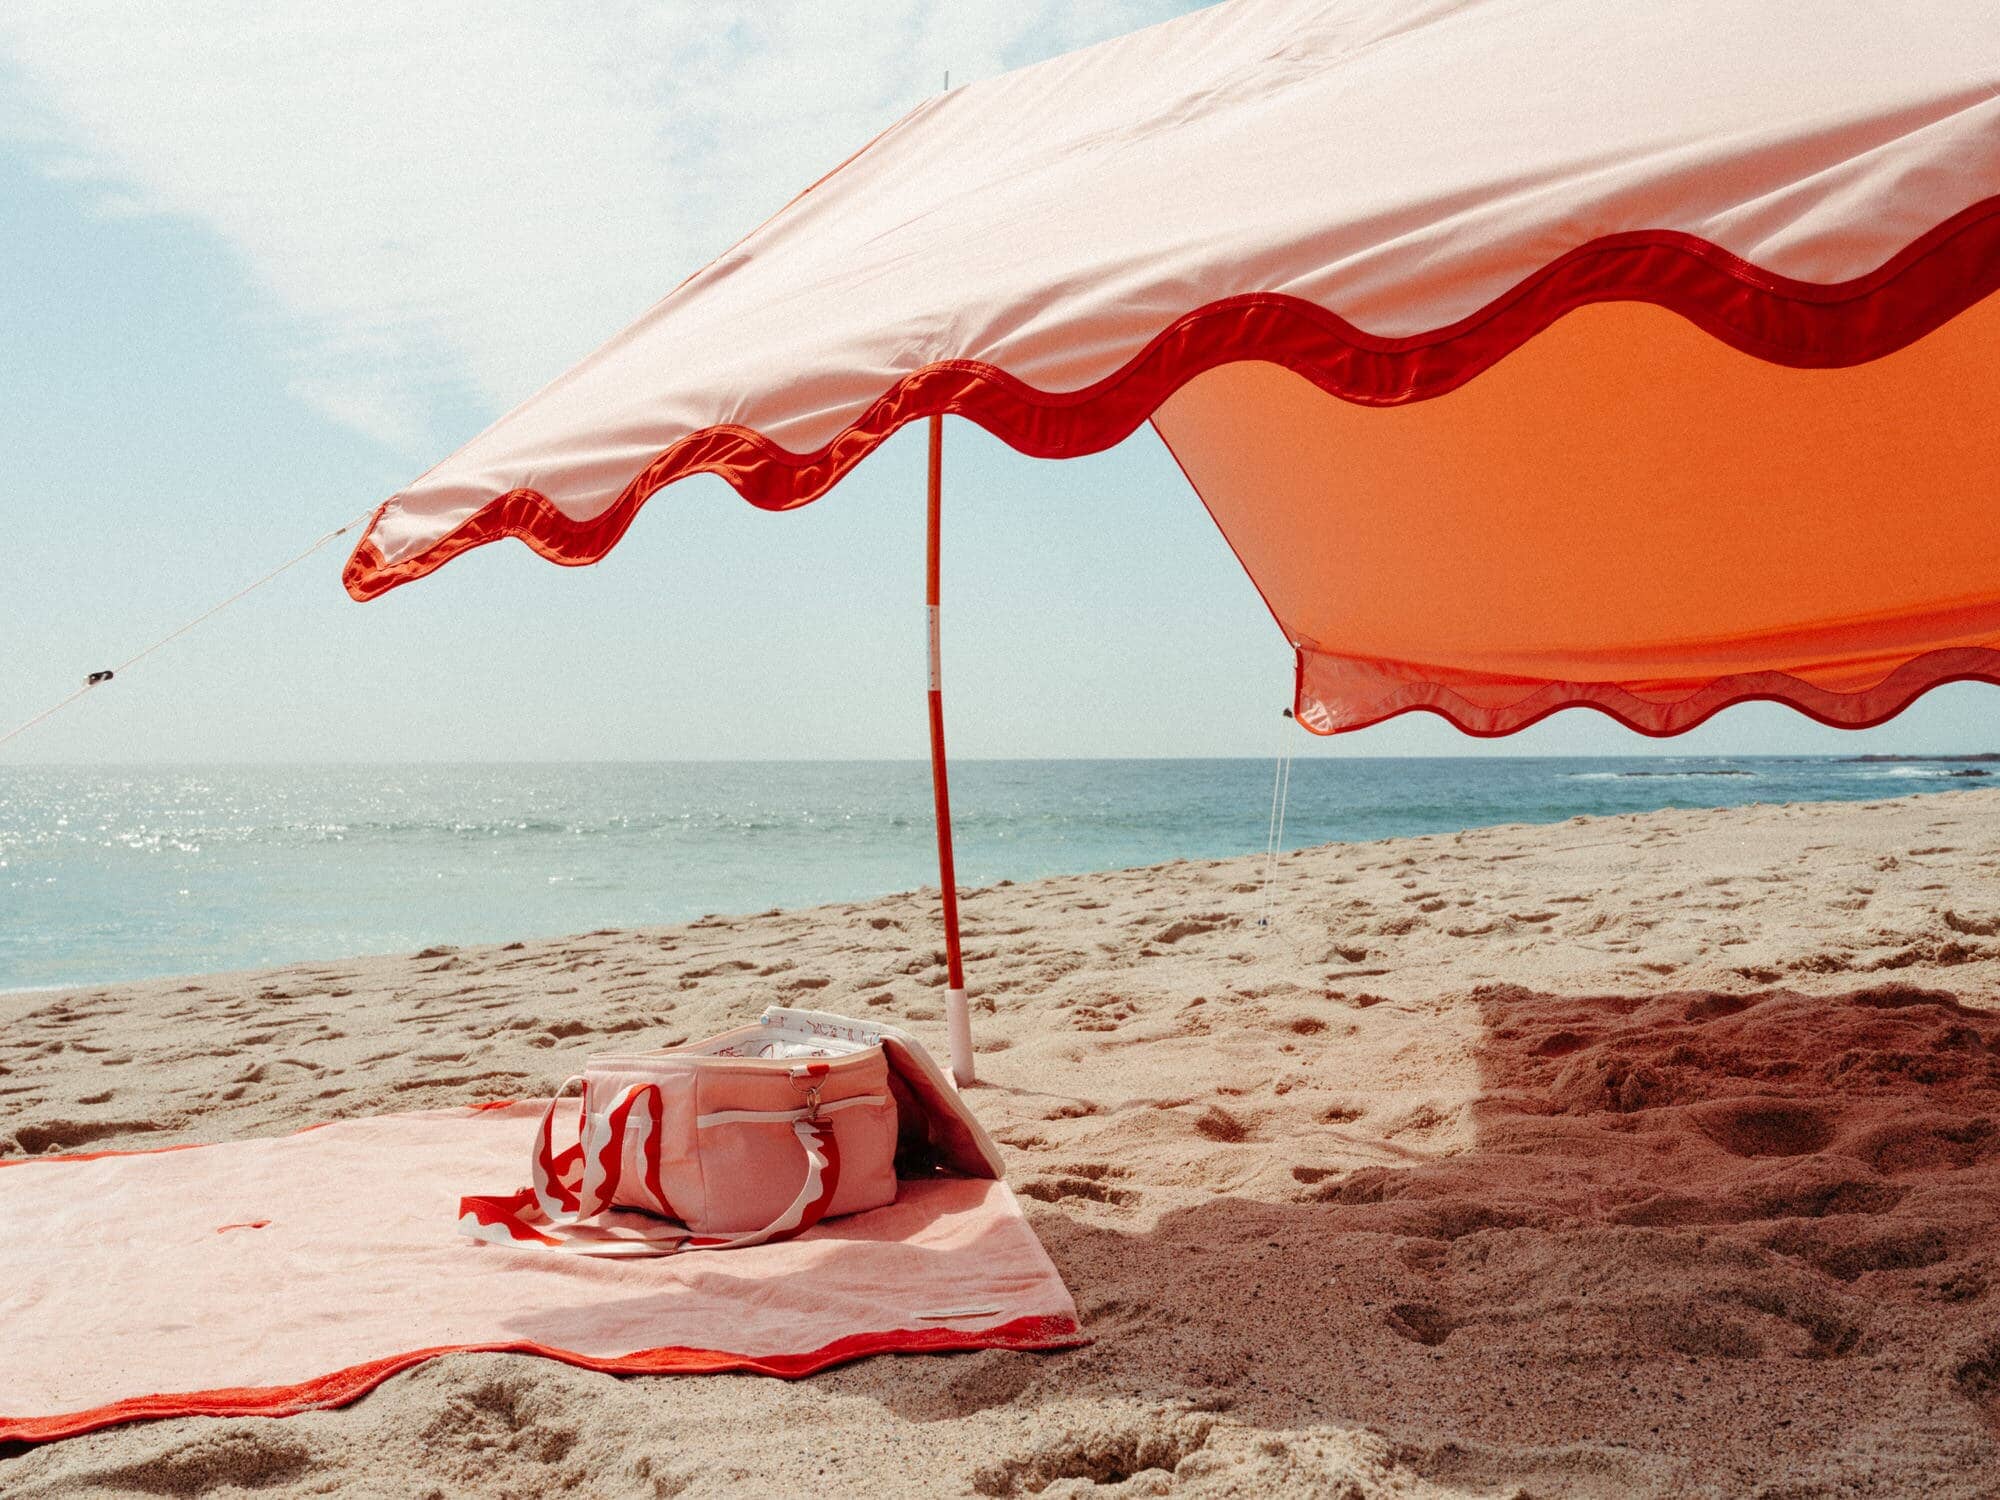 Riviera pink beach tent with matching accessories on the beach